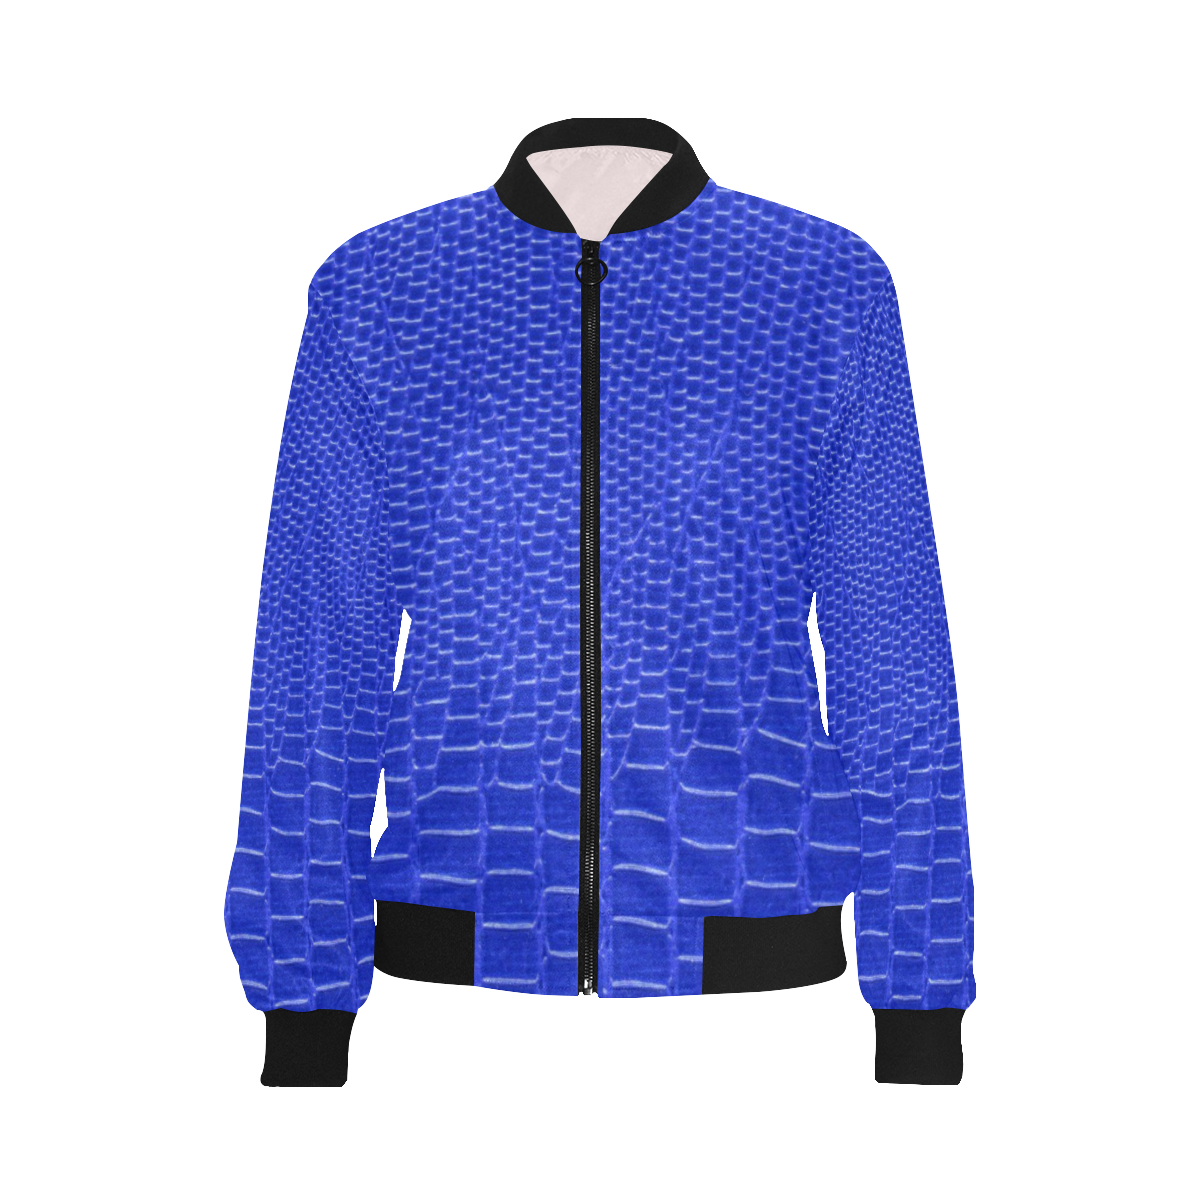 LEATHER TEXTURE 6 All Over Print Bomber Jacket for Women (Model H36)